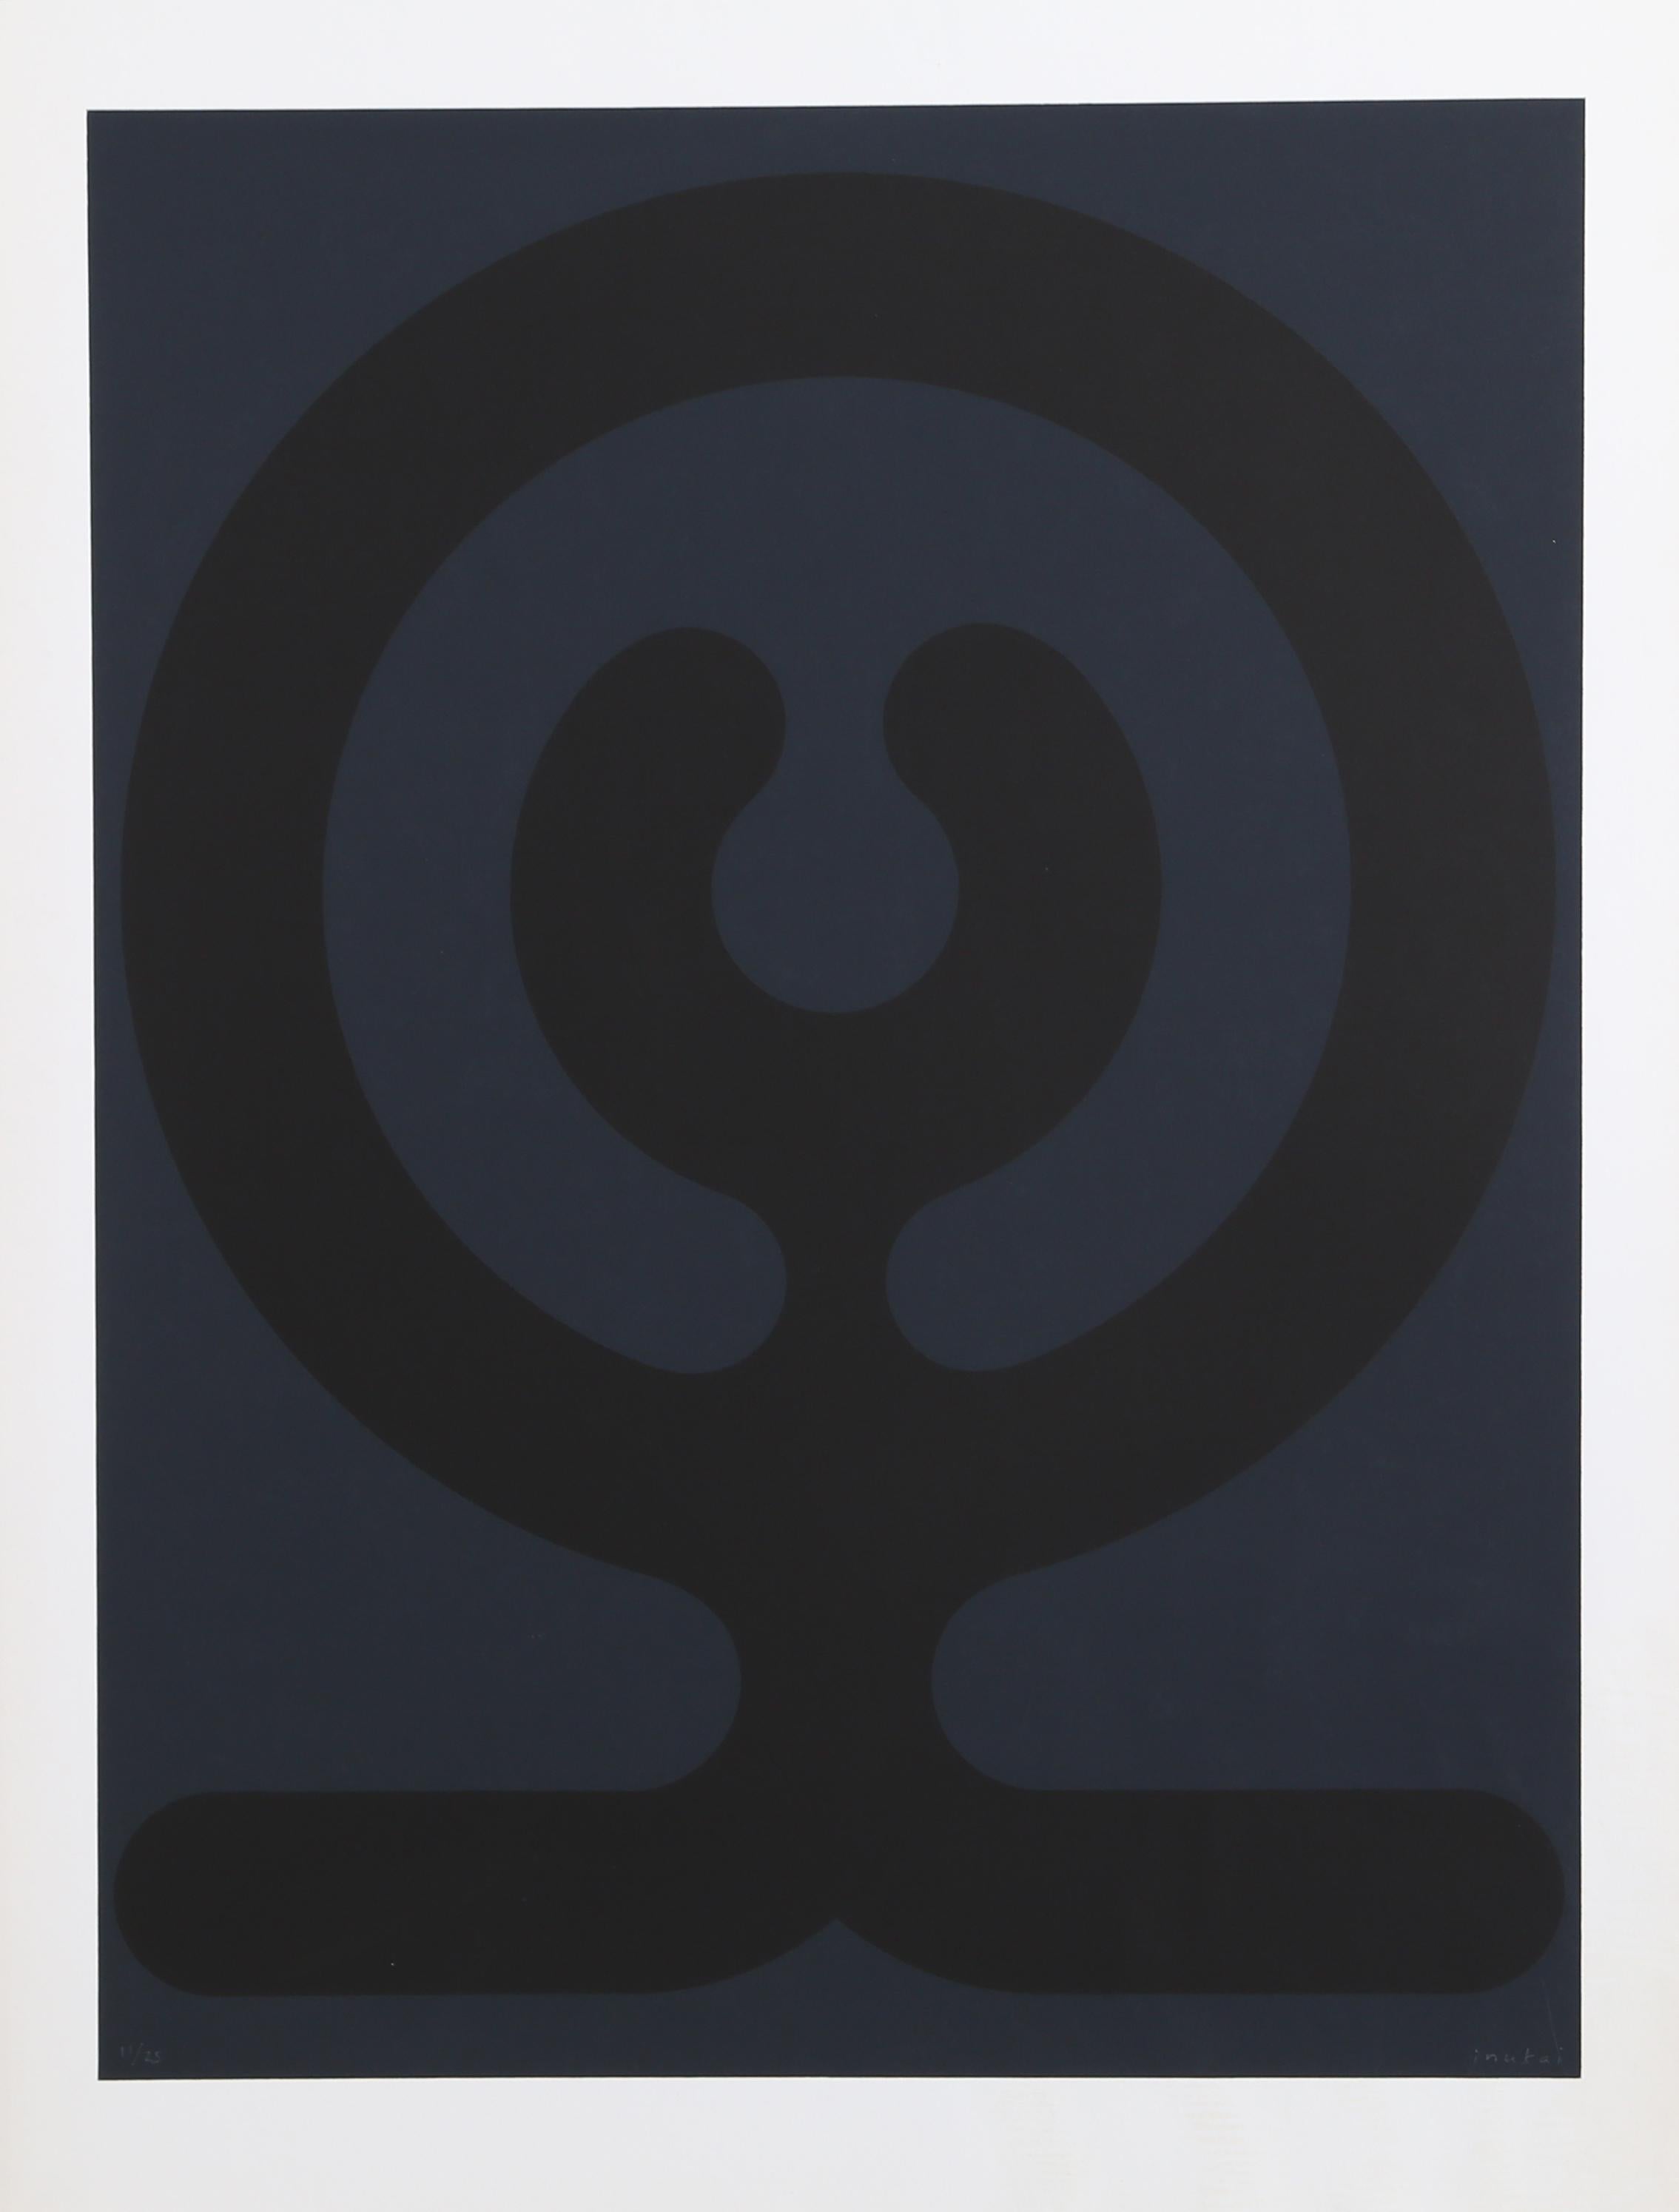 Artist: Kyohei Inukai, American (1913 - 1985)
Title: Egg (Black)
Year: circa 1970
Medium: Silkscreen, signed and numbered in pencil
Edition: 25
Image Size: 26.5 x 20 inches
Size: 35 x 23 in. (88.9 x 58.42 cm)